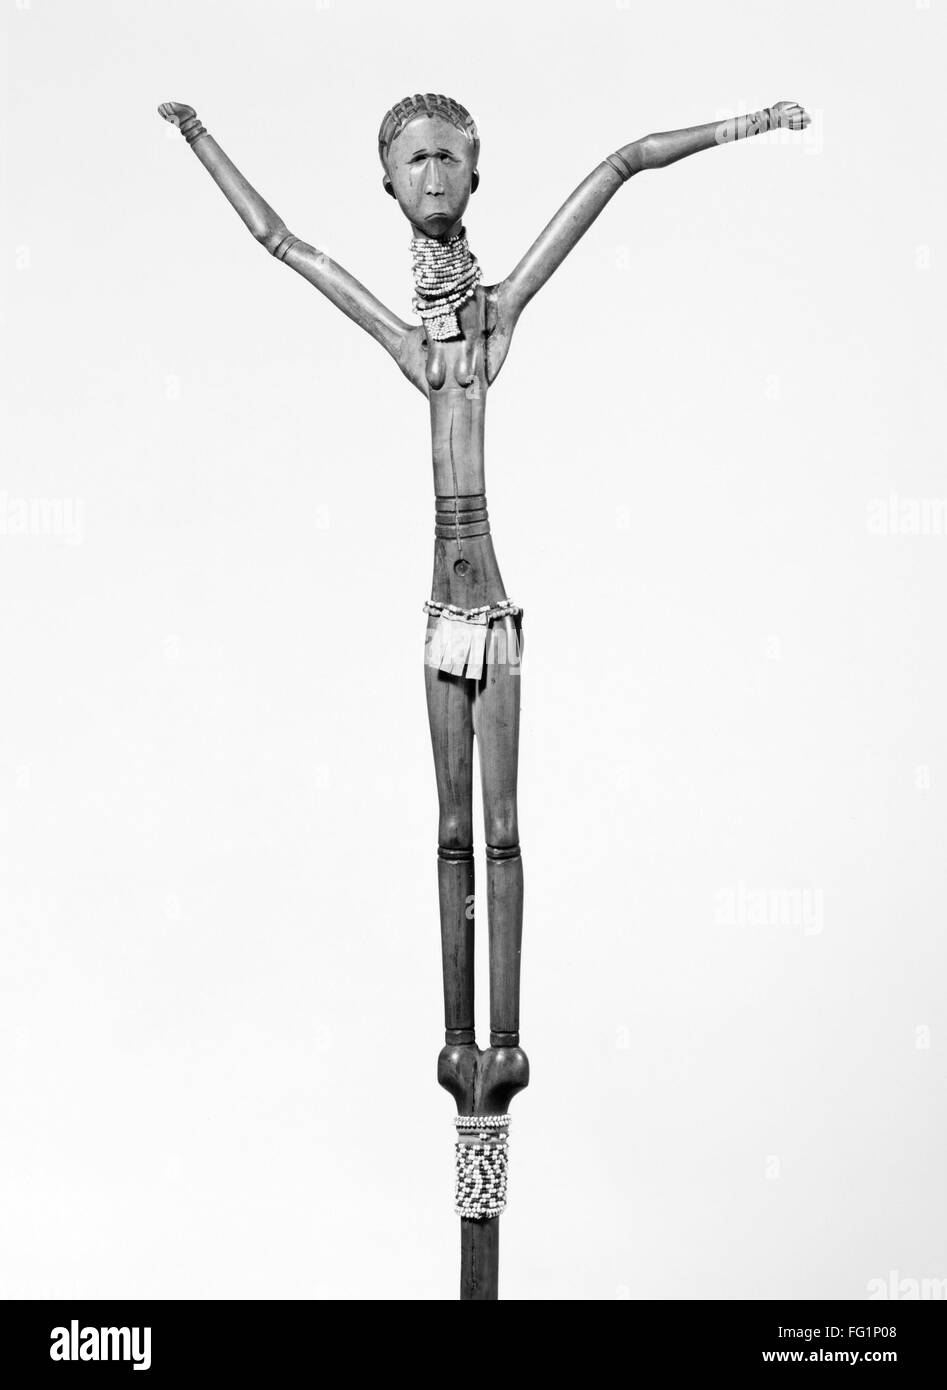 AFRICA: STAFF FIGURE. /nDetail of a wood staff made by the Kongo people from the Democratic Republic of the Congo, late 19th or early 20th century. Photograph. Stock Photo